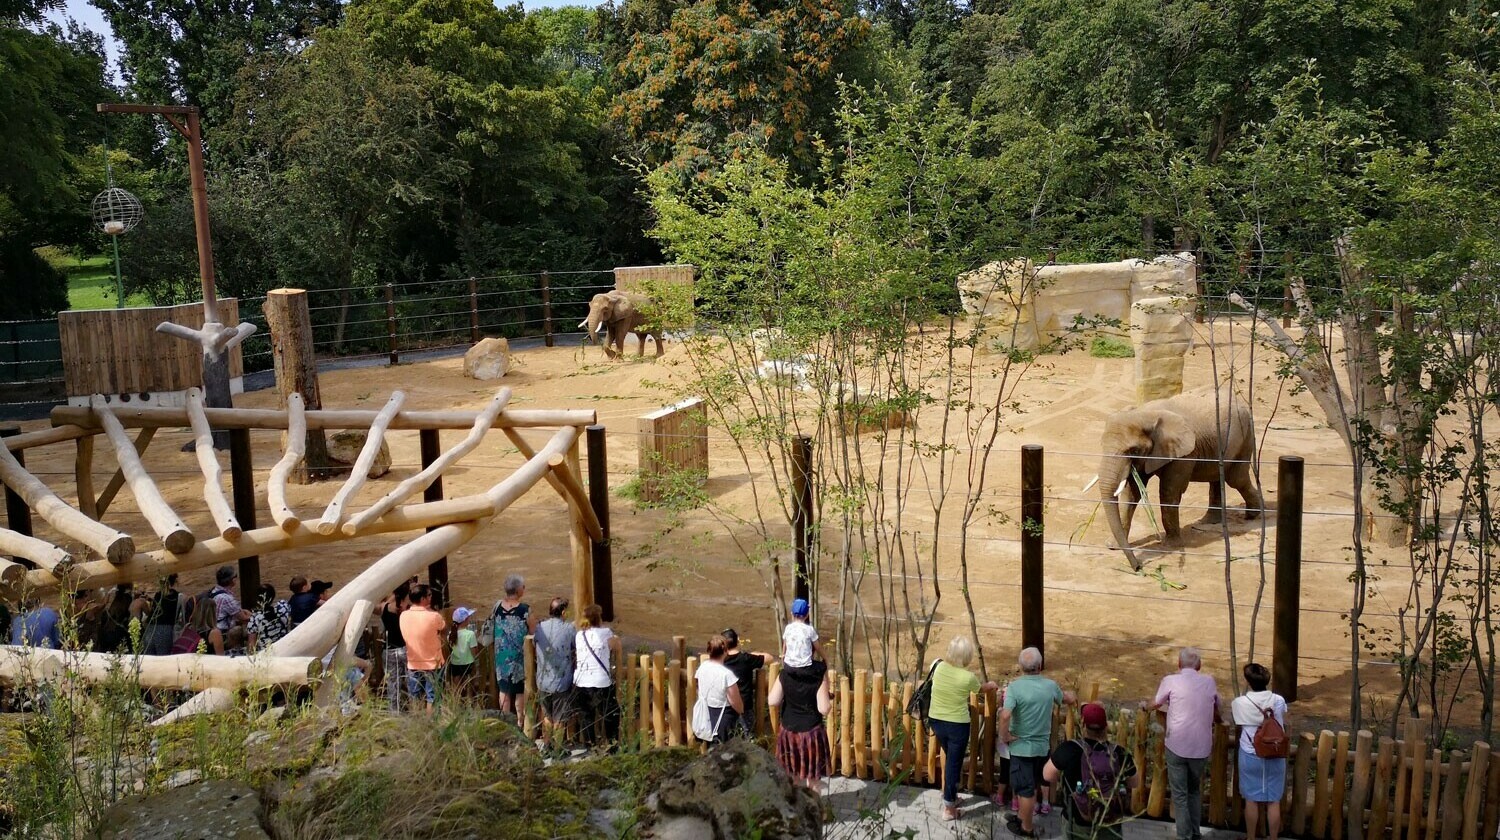 Extension of the elephant enclosure completed.